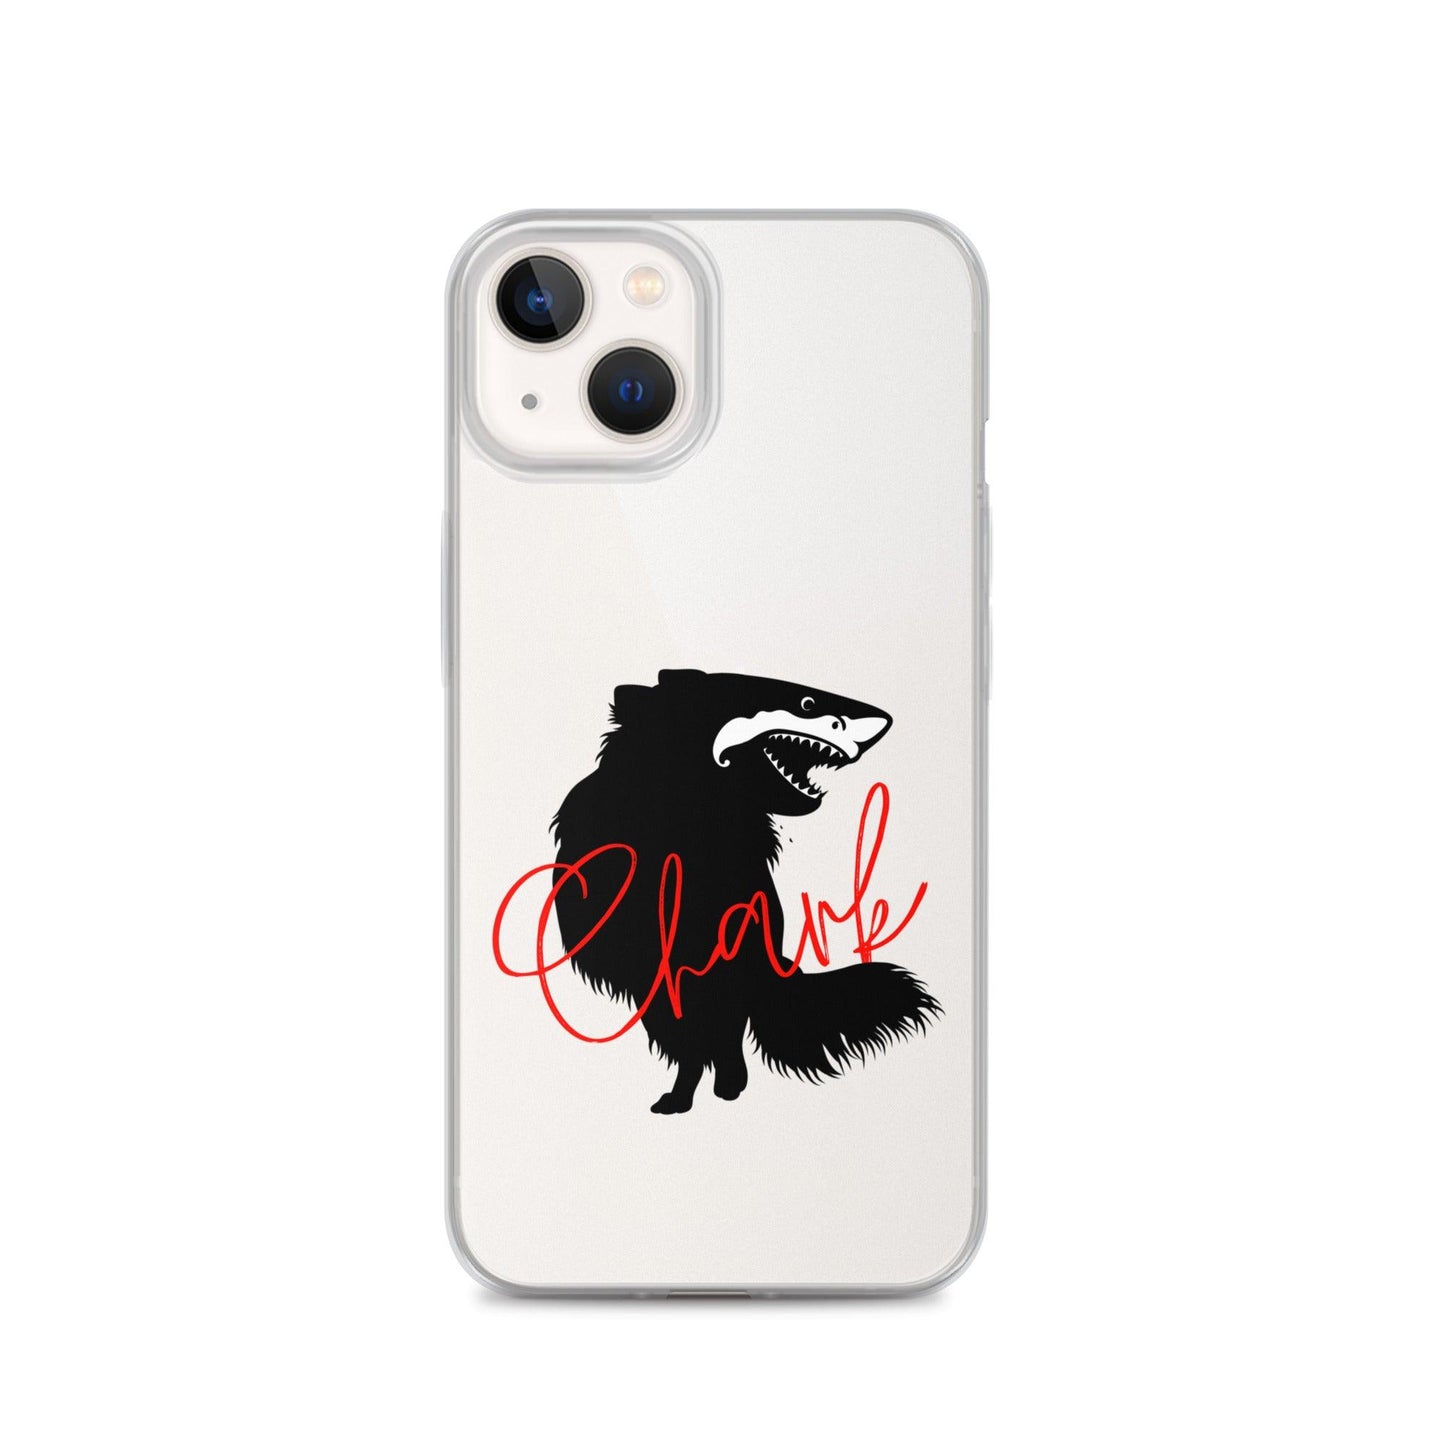 Chihuahua + Shark = Chark Clear iPhone case with the black silhouette of a longhaired chihuahua with the face of a great white shark - mouth open to show off jaws lined with lots of sharp white teeth. The word "Chark" is artfully placed in red cursive font over the image. For trendy chi lovers. iPhone 13 case.